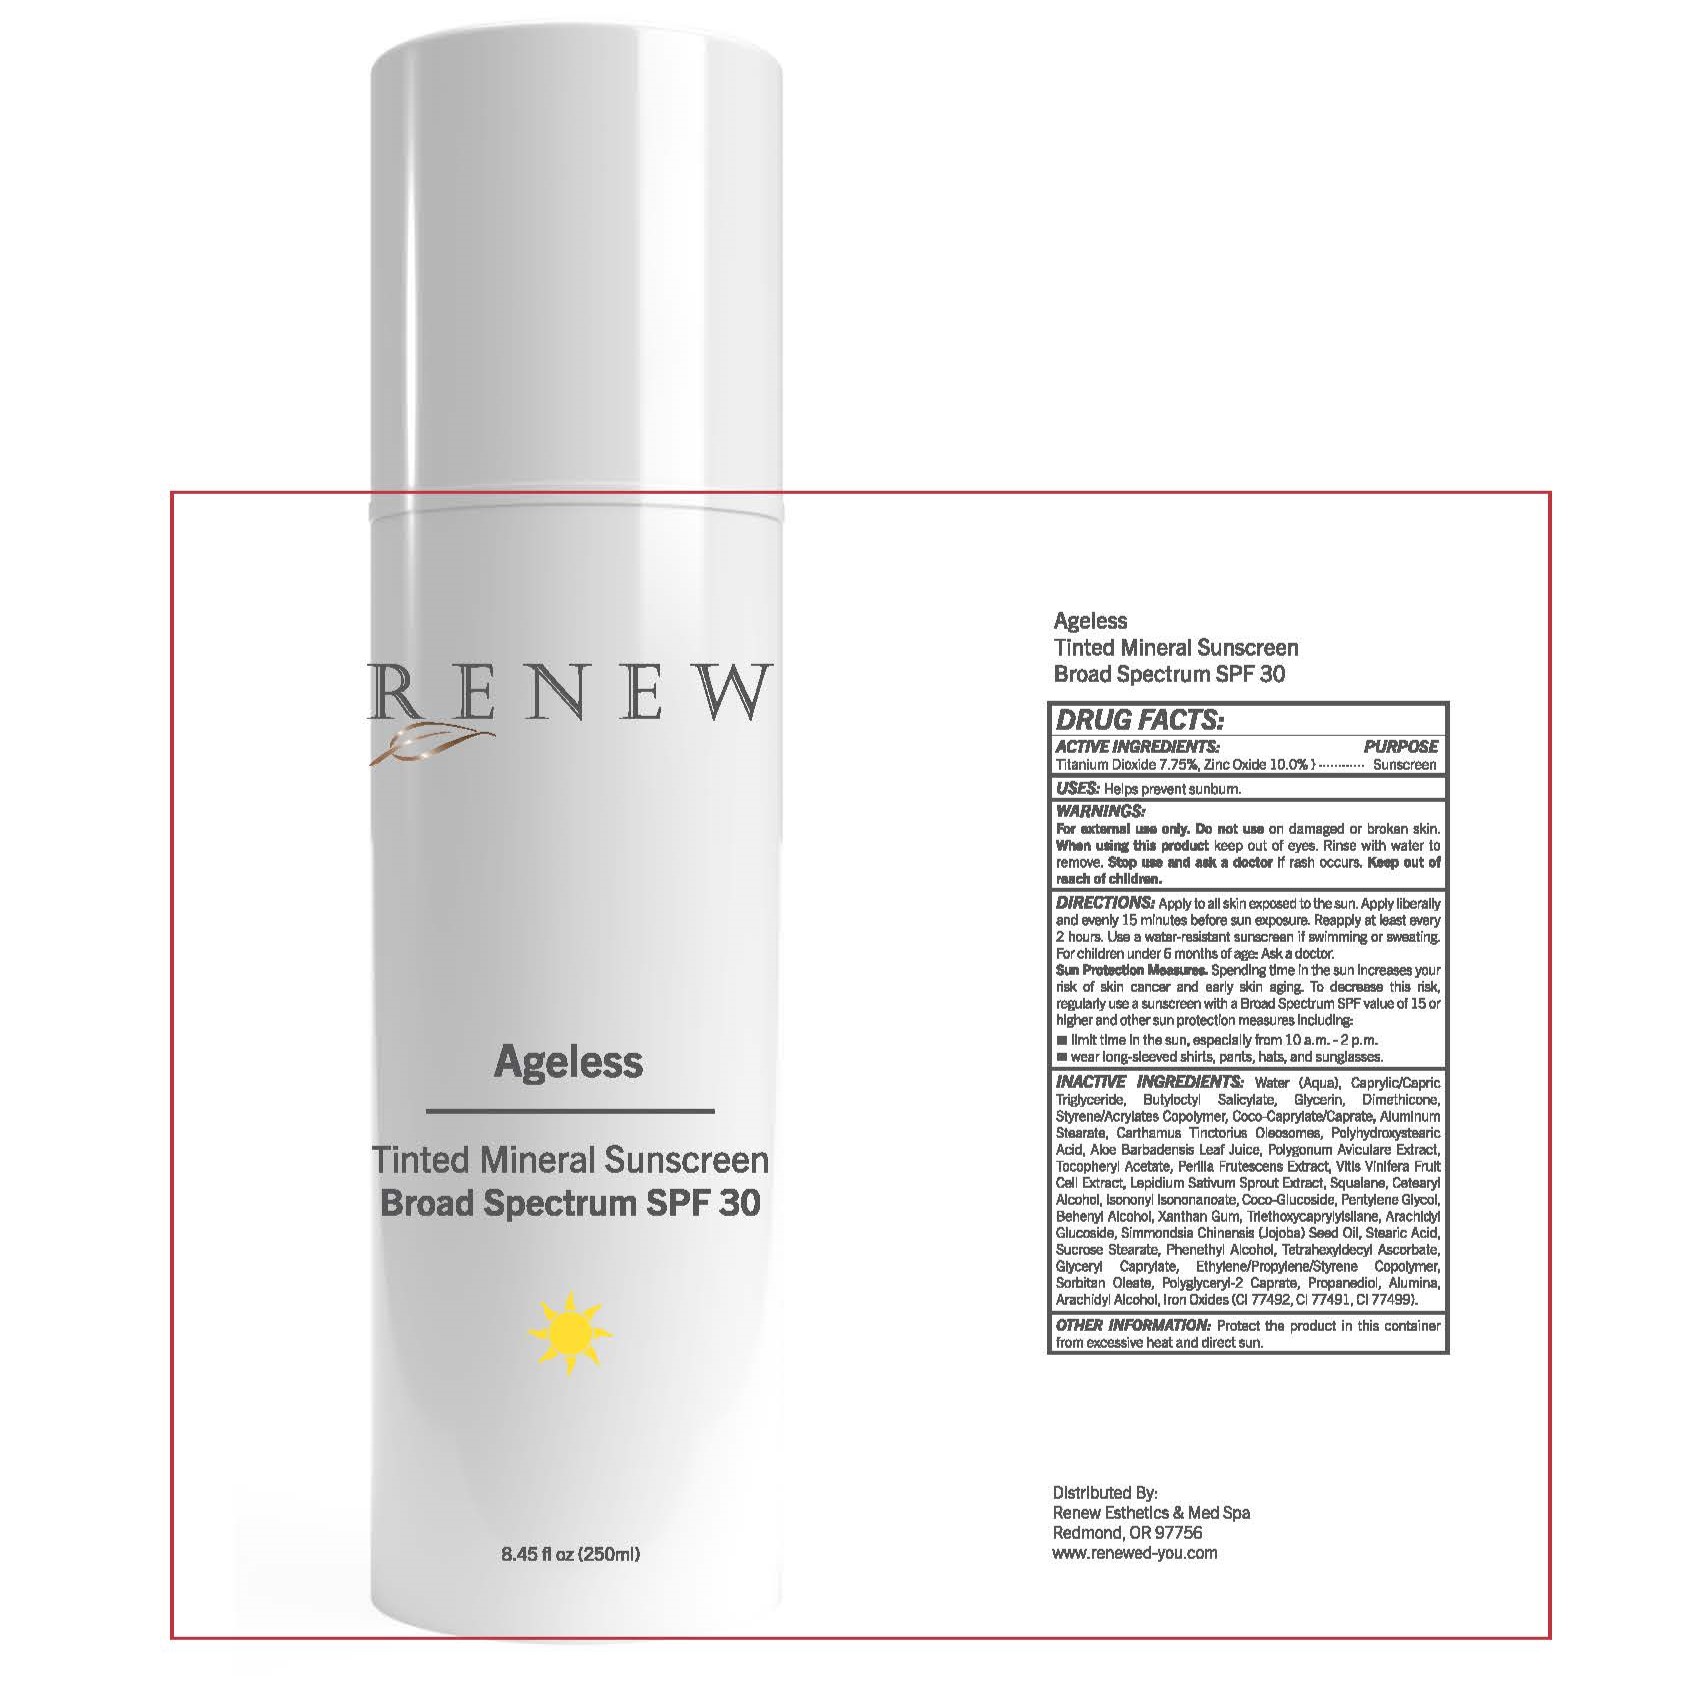 Ageless Tinted Mineral Sunscreen Broad Spectrum SPF 30